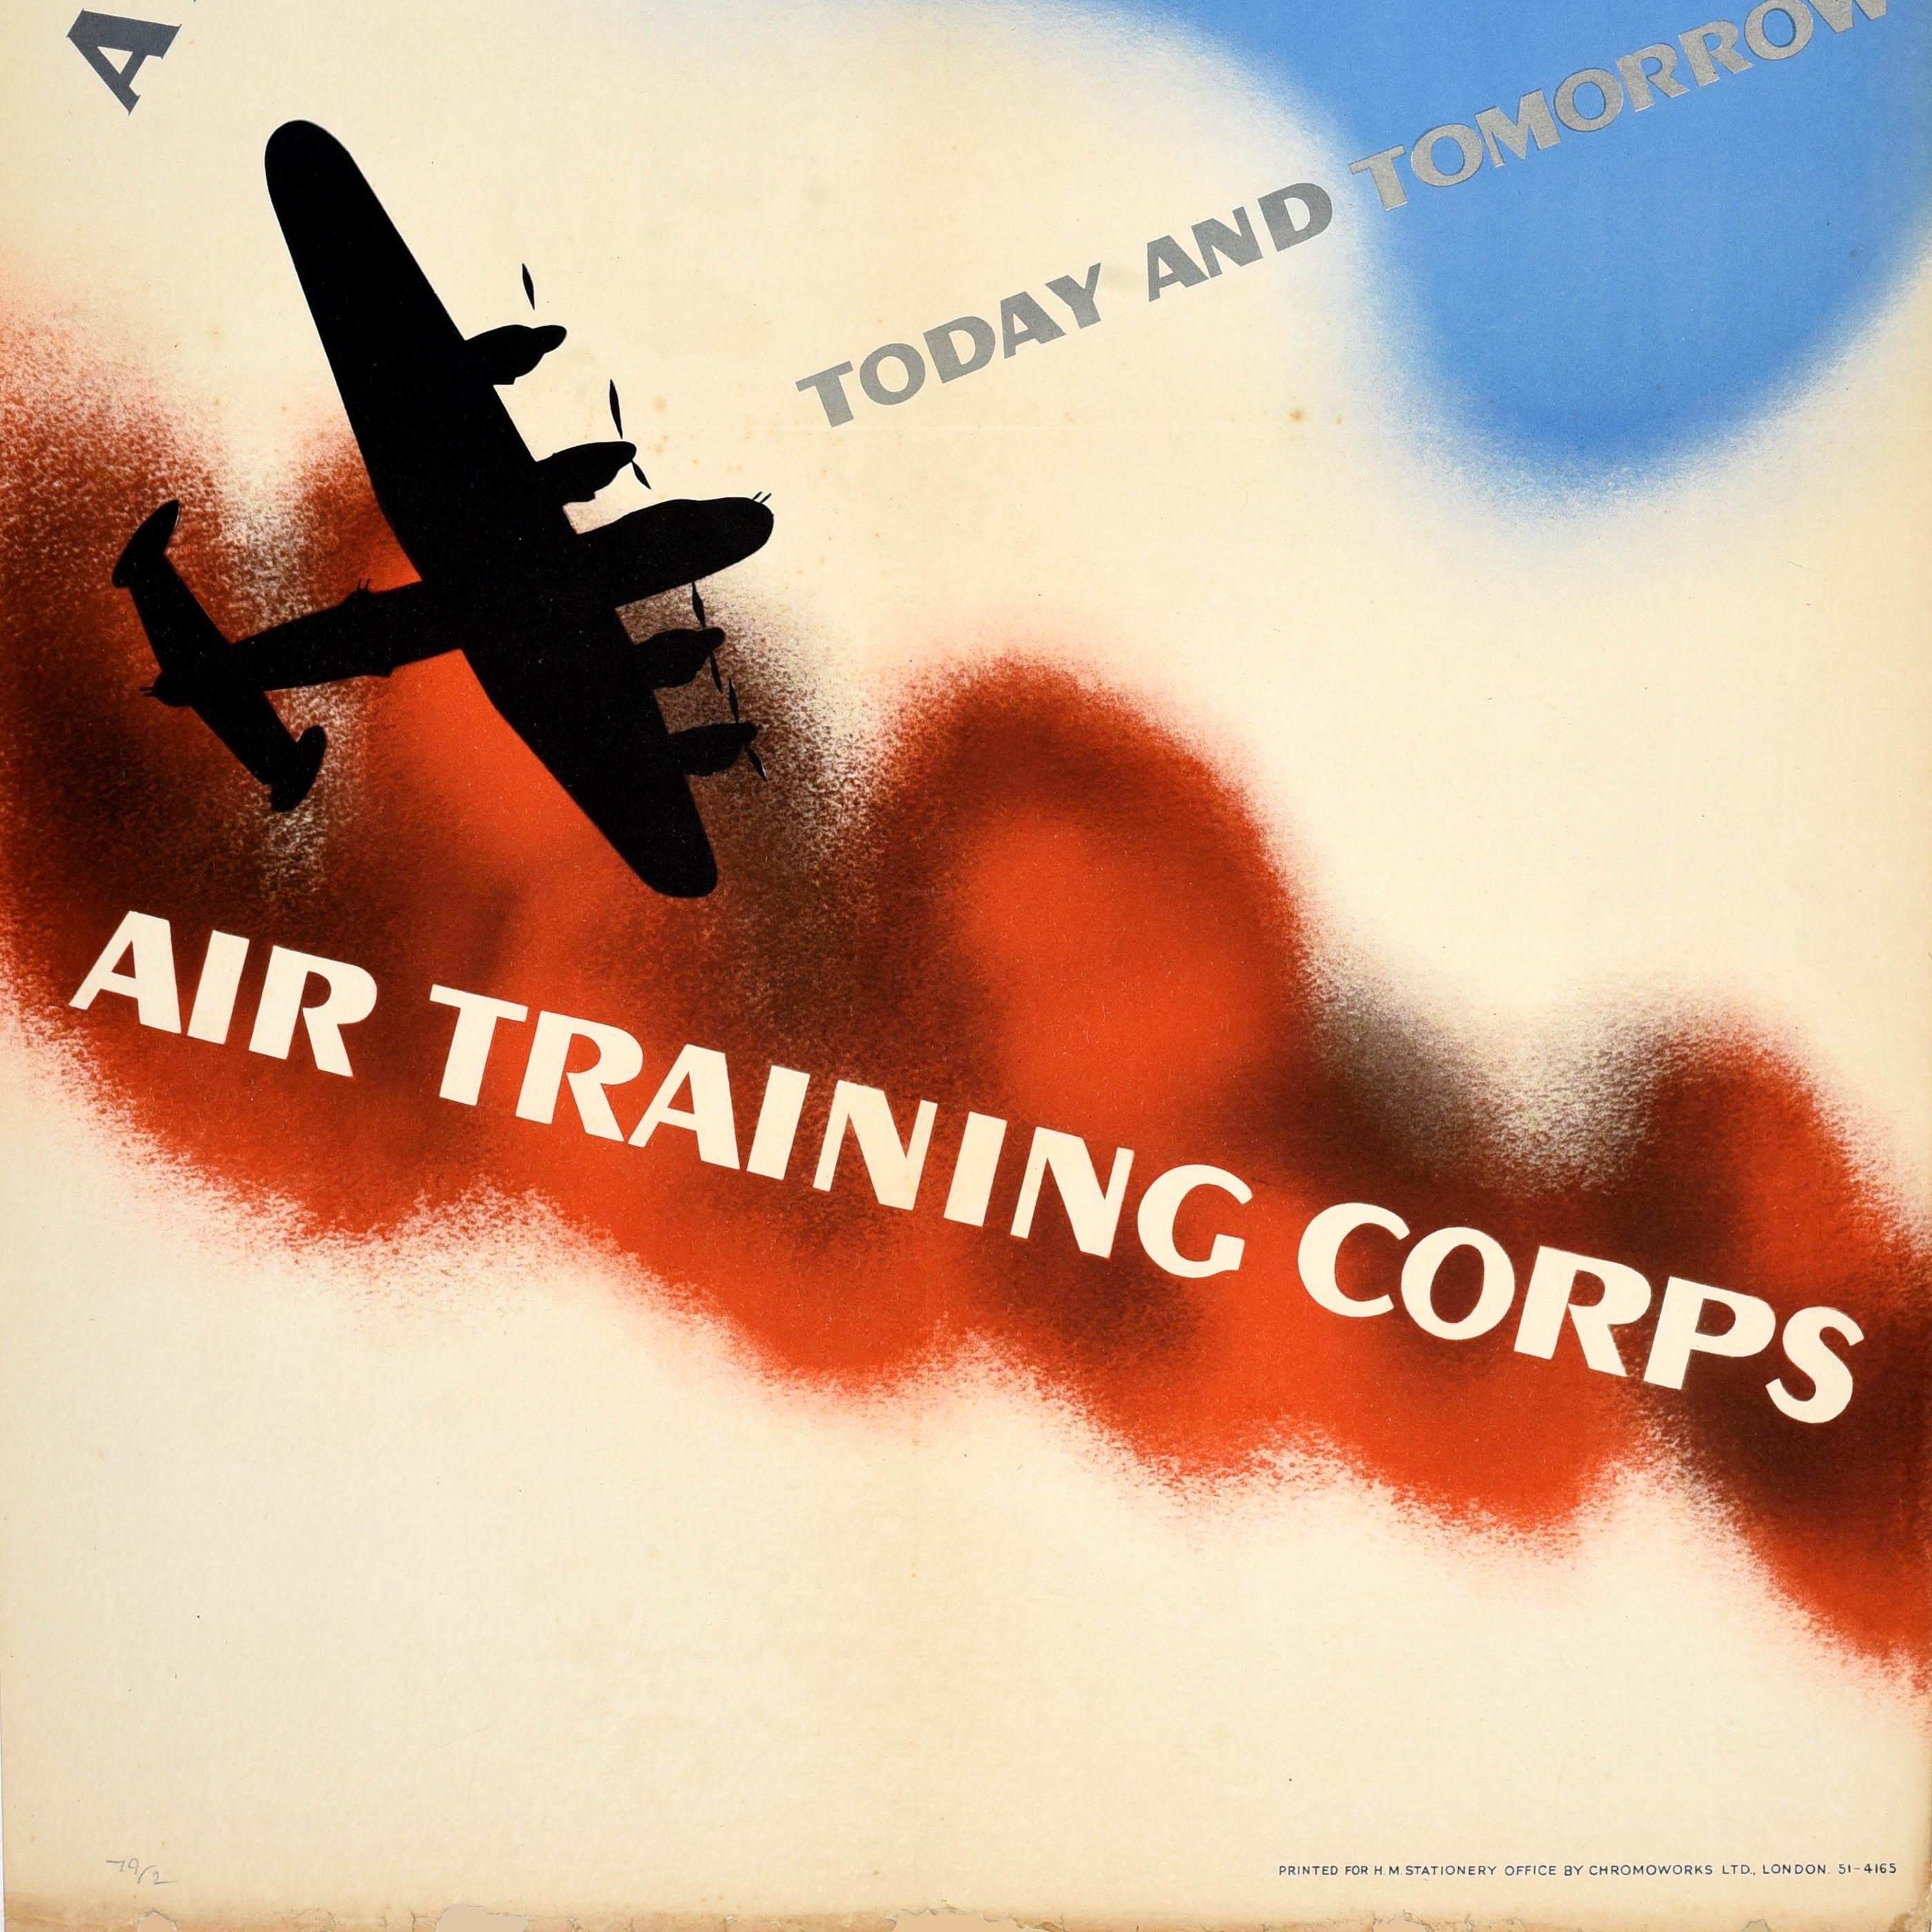 British Original Vintage RAF Royal Air Force Recruitment Poster Air Force Training Corps For Sale